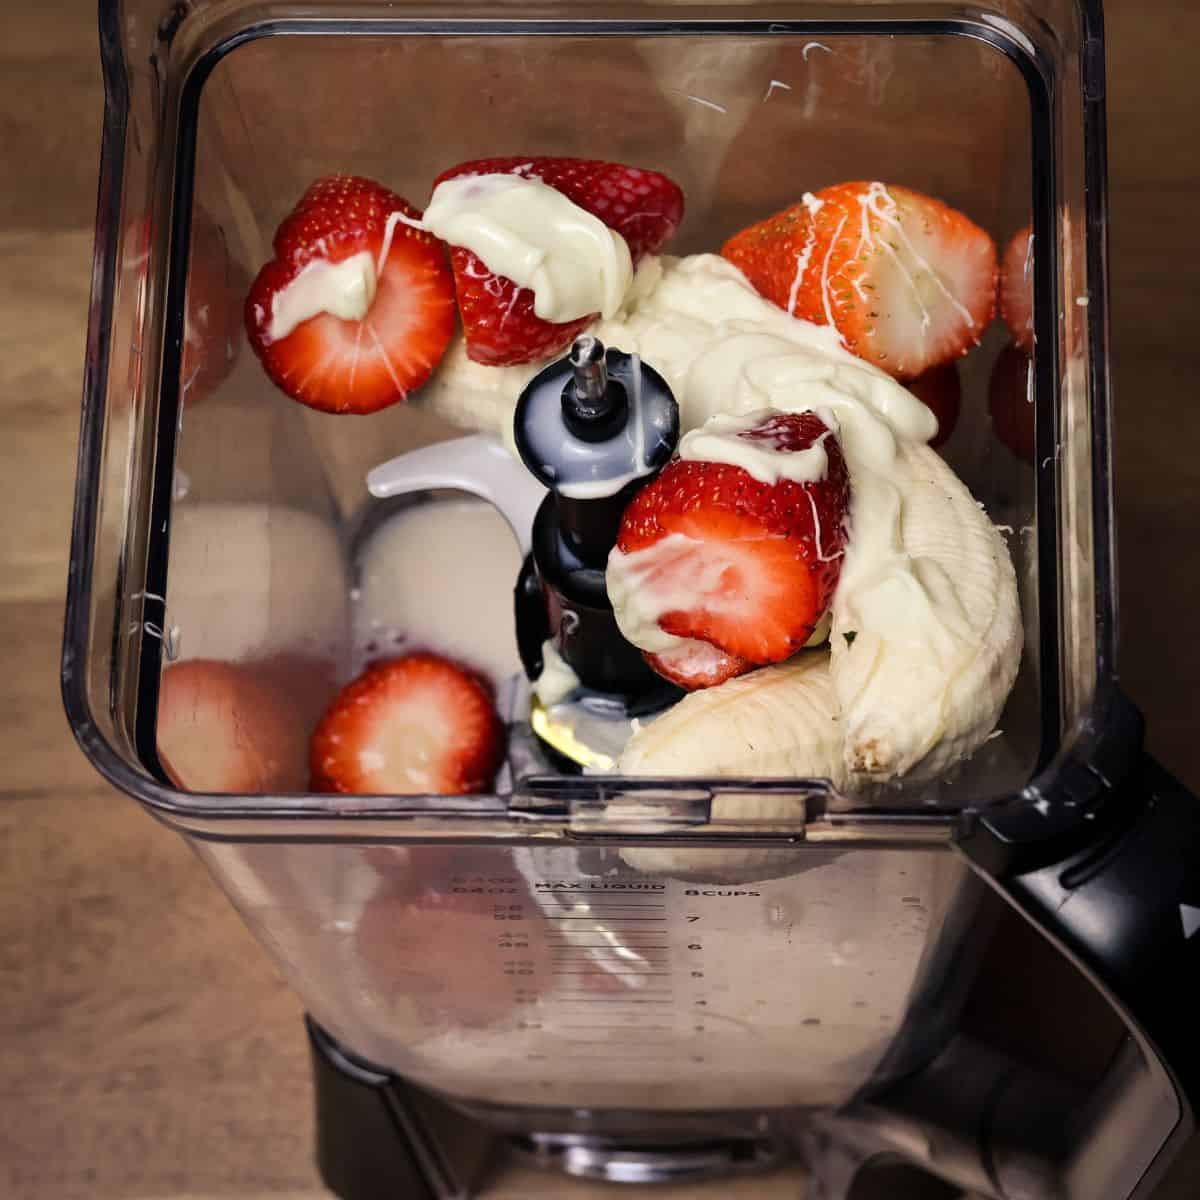 Top view of a blender with fresh strawberries, sliced bananas, and dollops of melted white chocolate on top, ready to be blended into a smoothie.